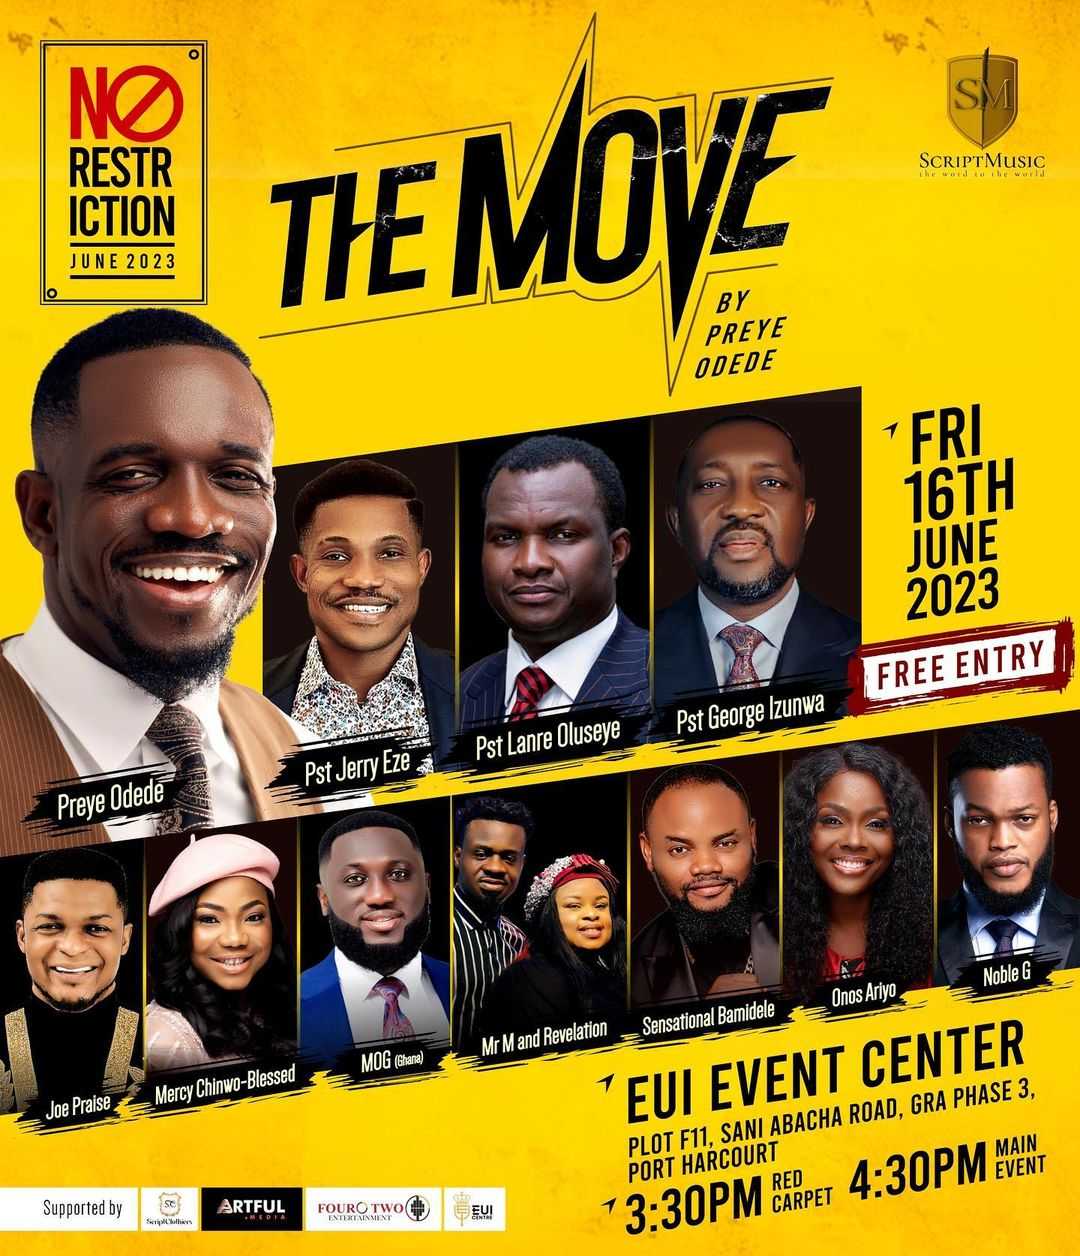 Preye Odede The MOVE Concert 16th June 2023